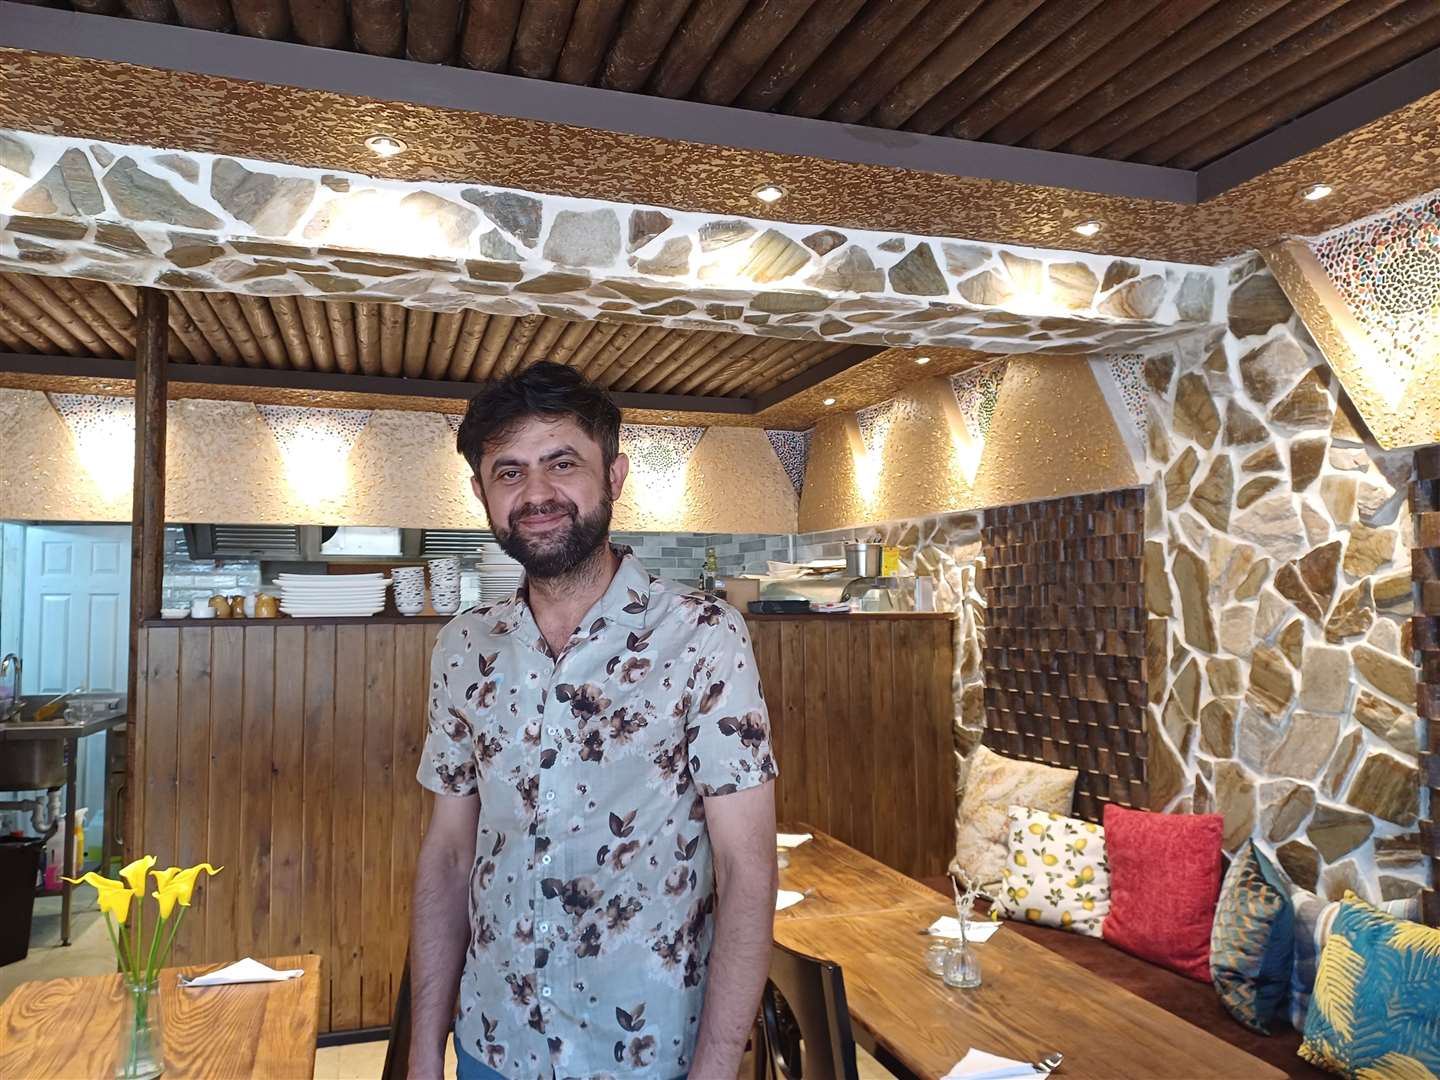 Chef and owner Rwand Khadir is hoping to bring Mediterranean cuisine to Kent